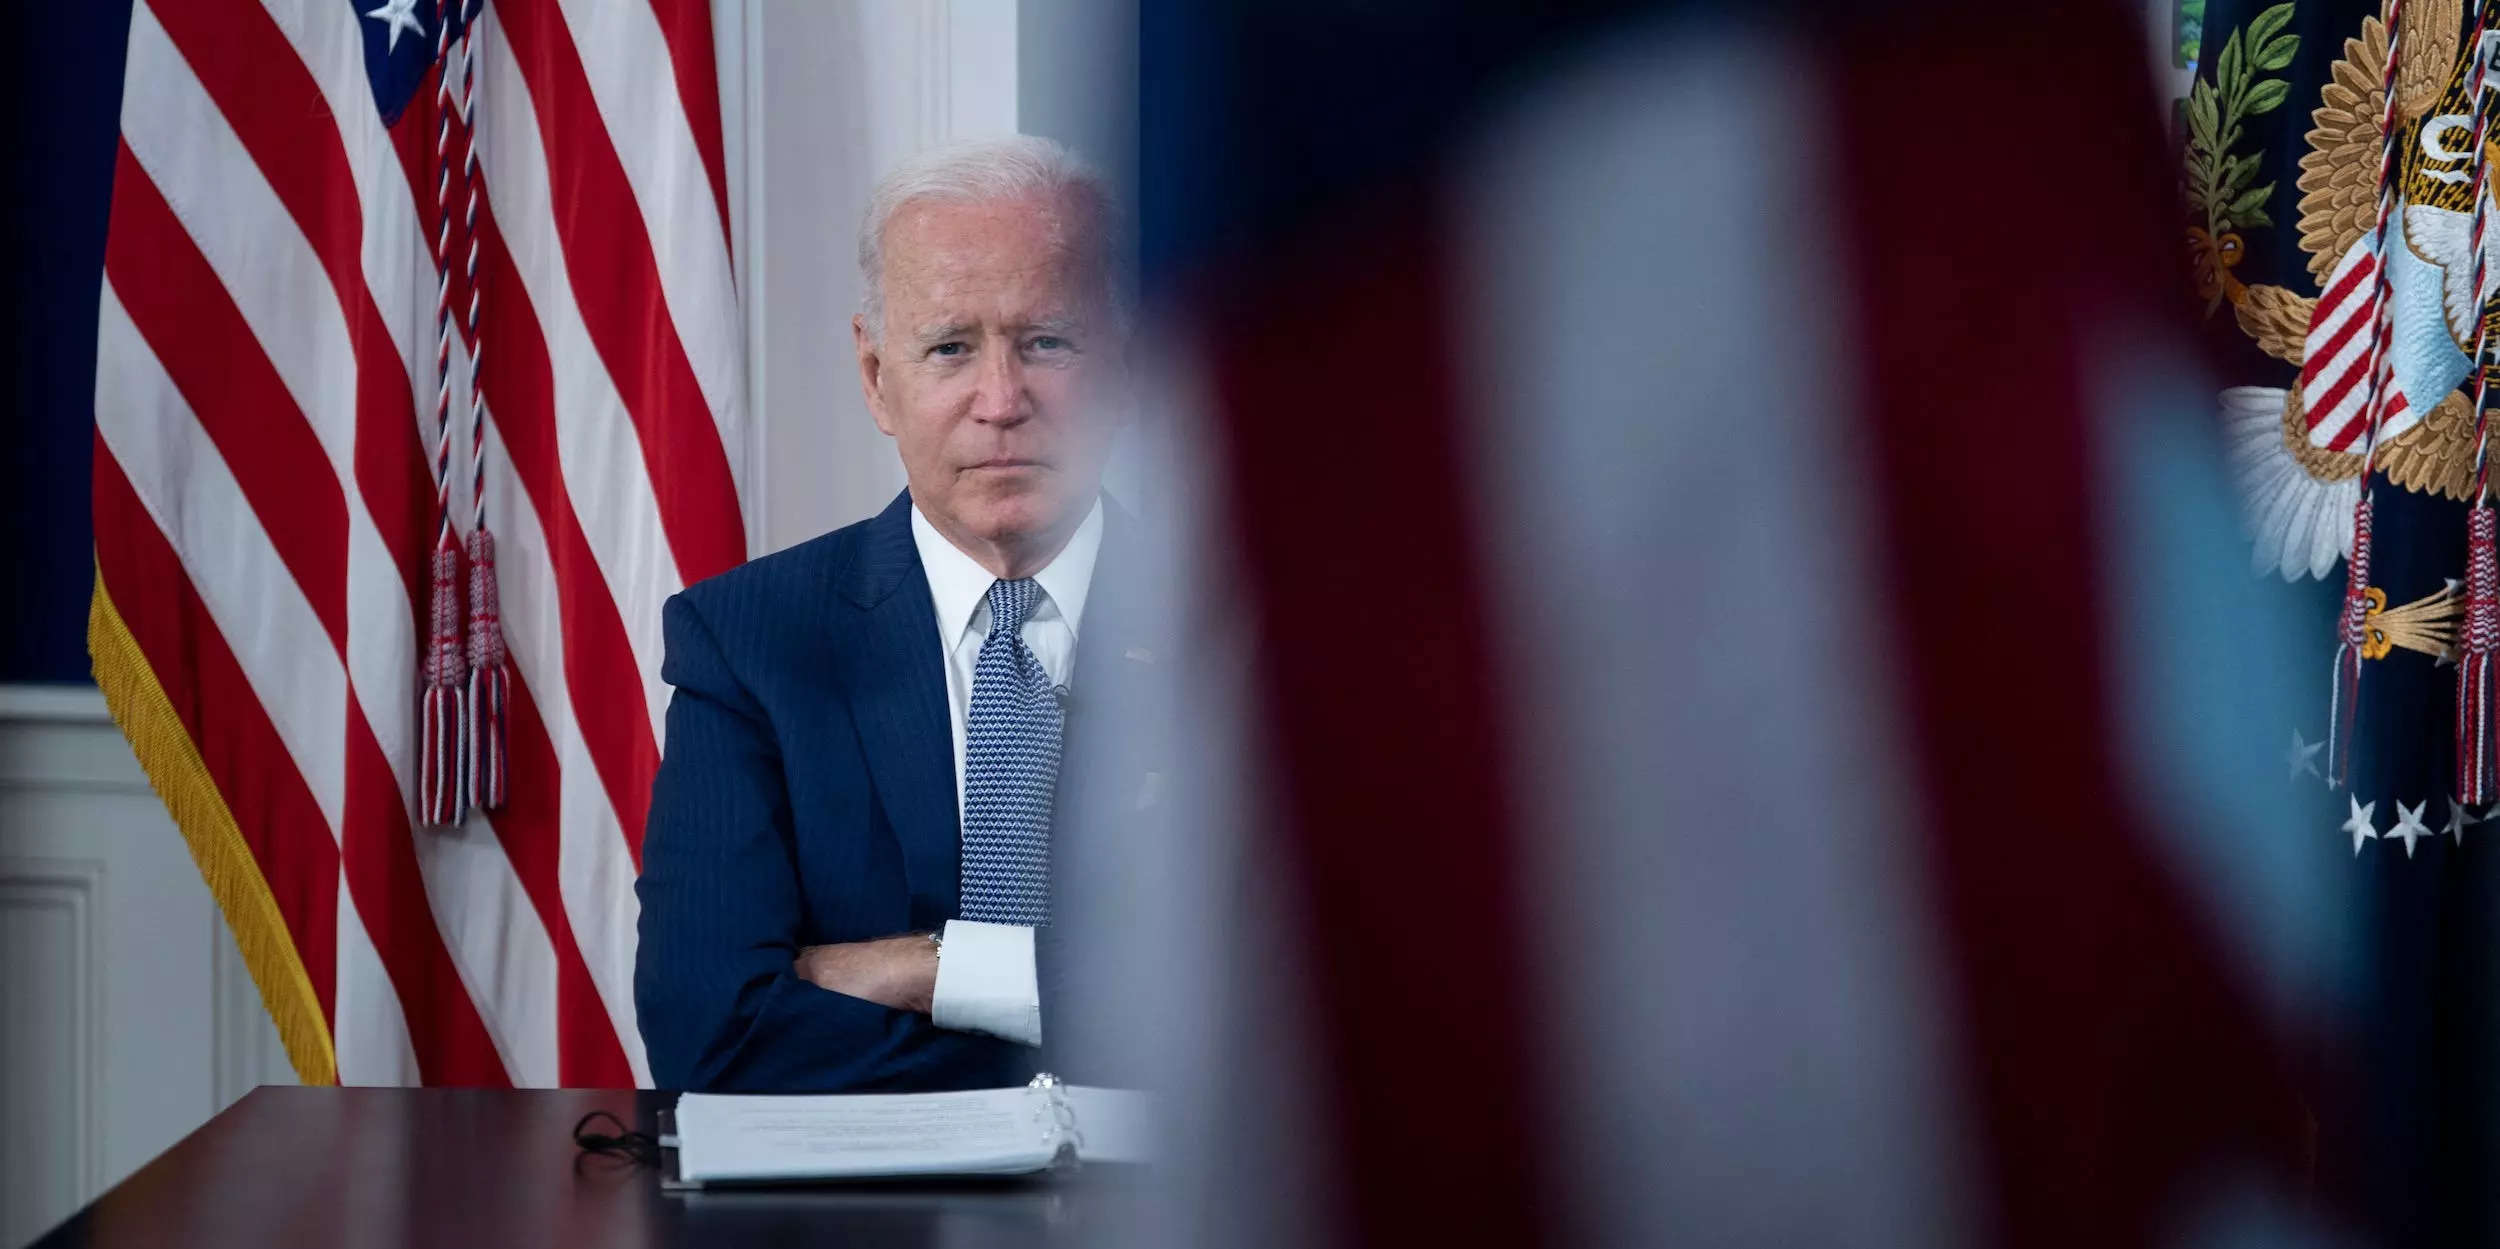 US President Joe Biden convenes a virtual Covid-19 Summit on the sidelines of the UN General Assembly, on September 22, 2021, in the South Court Auditorium of the White House in Washington, DC.